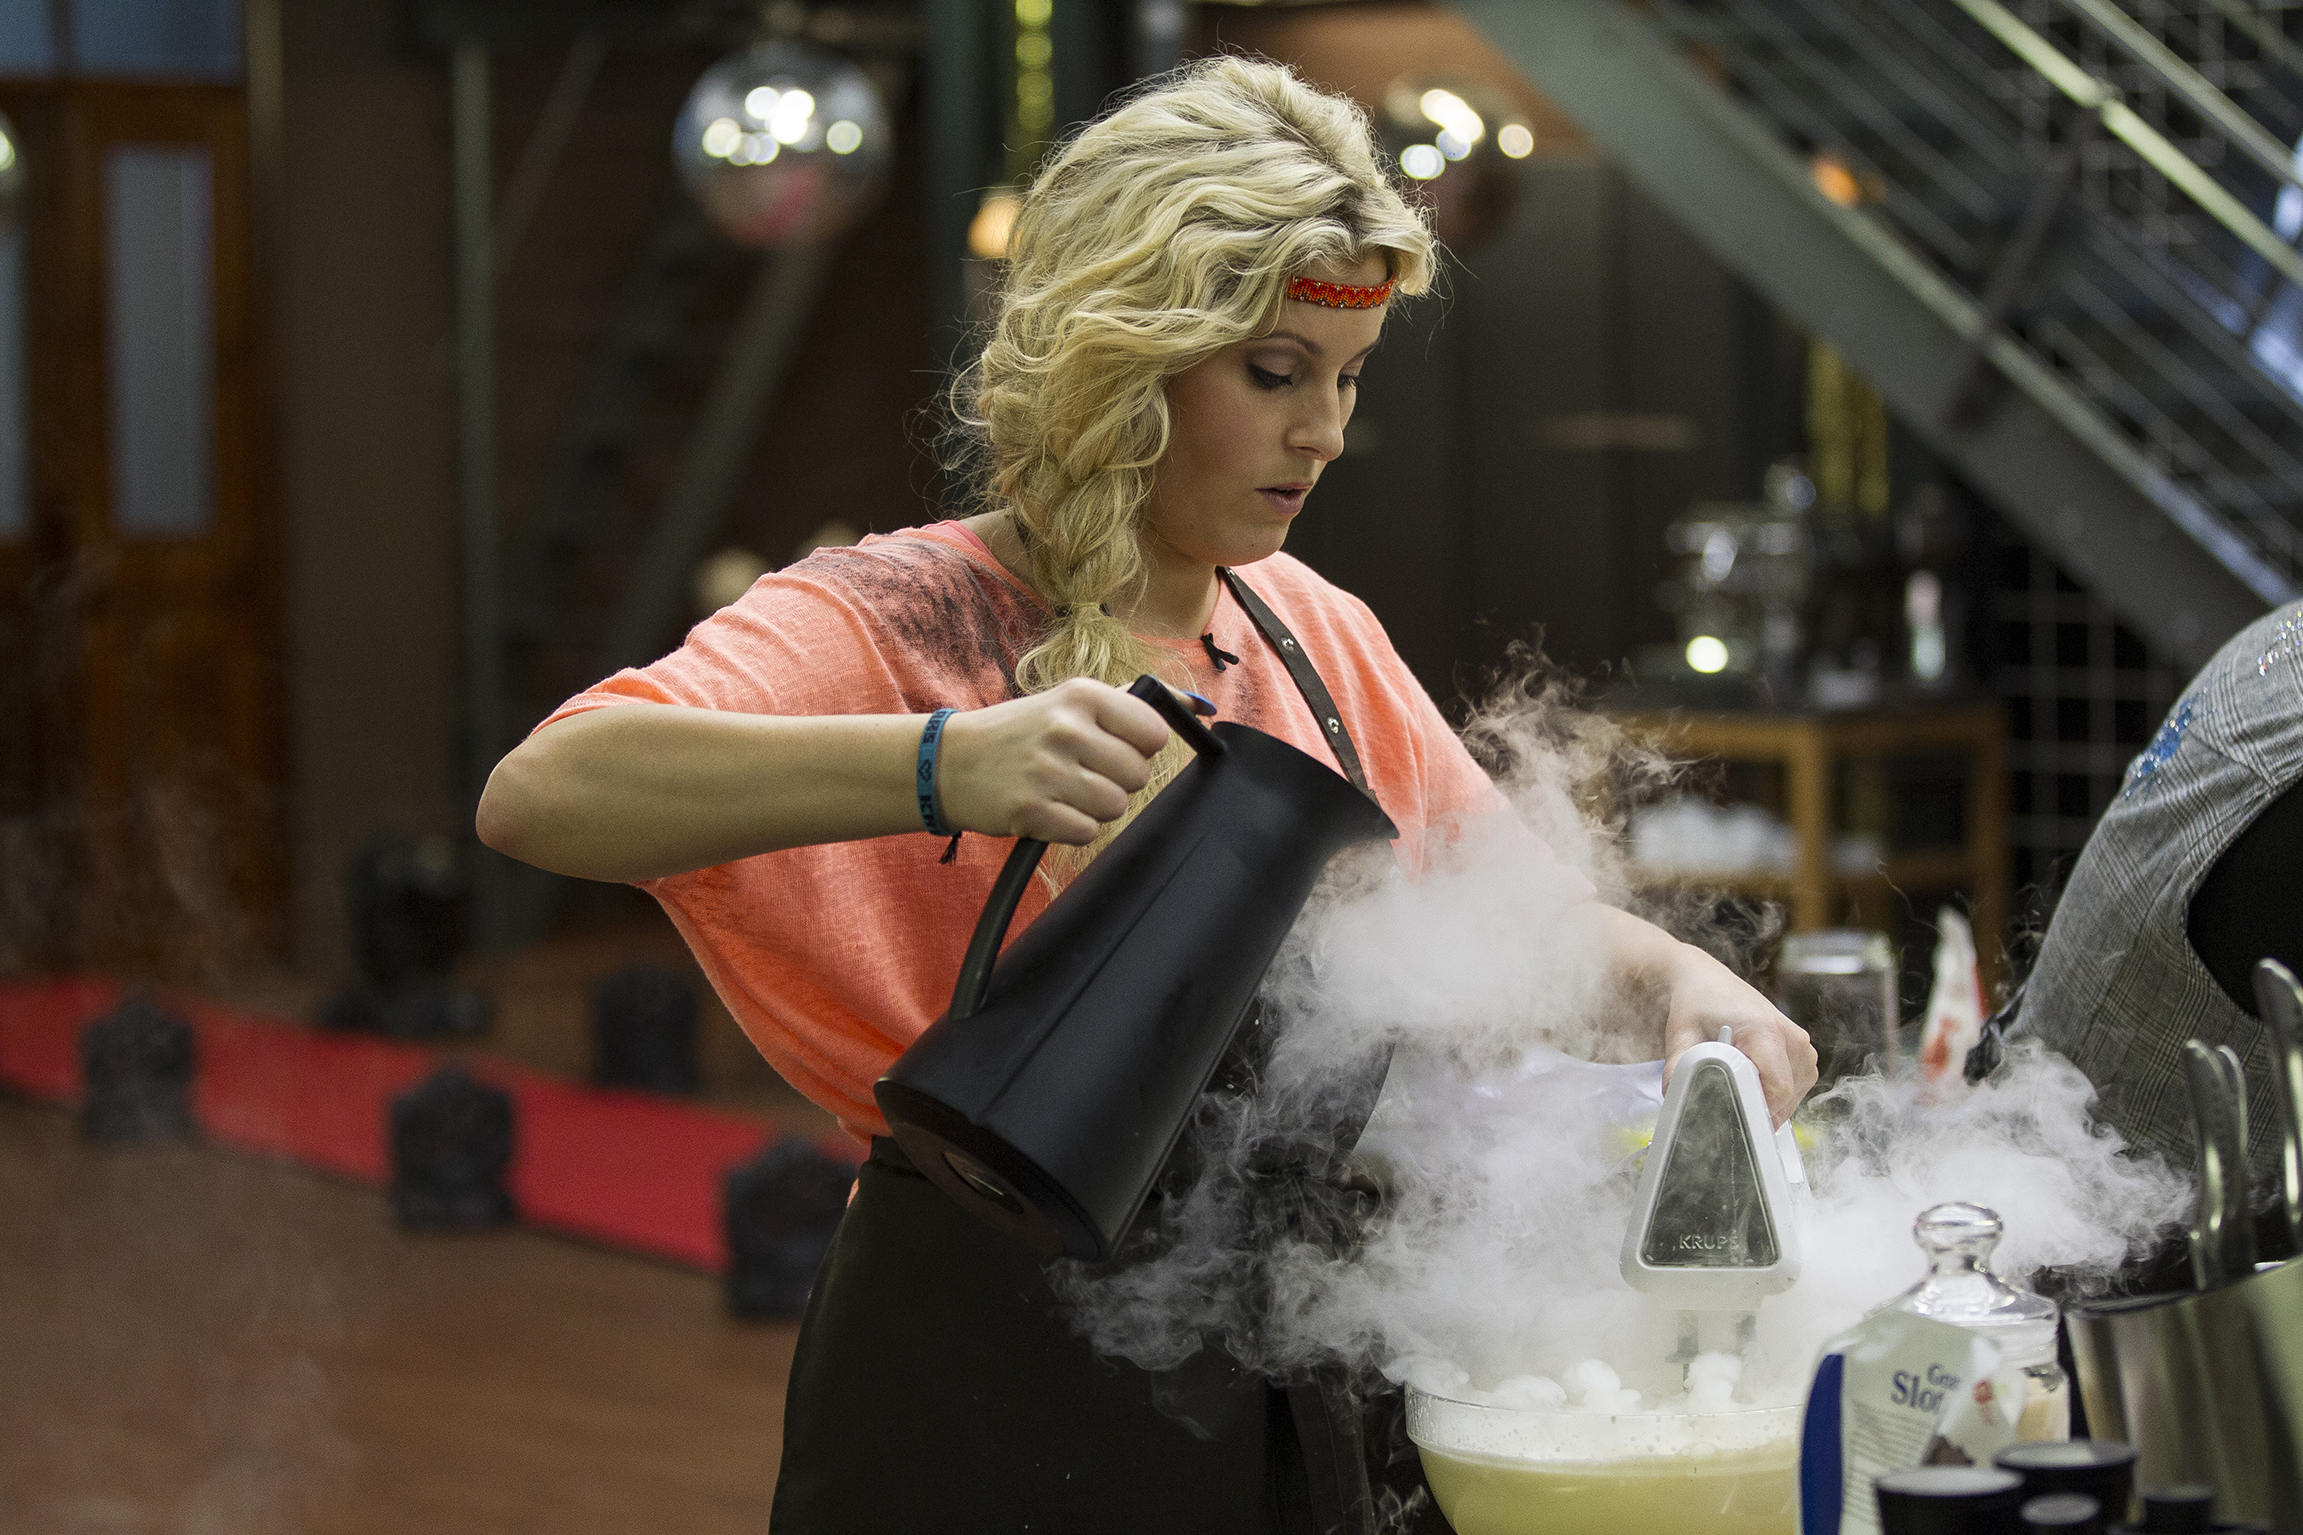 A MasterChef contestant (can't remember which country) uses liquid nitrogen for her dish.